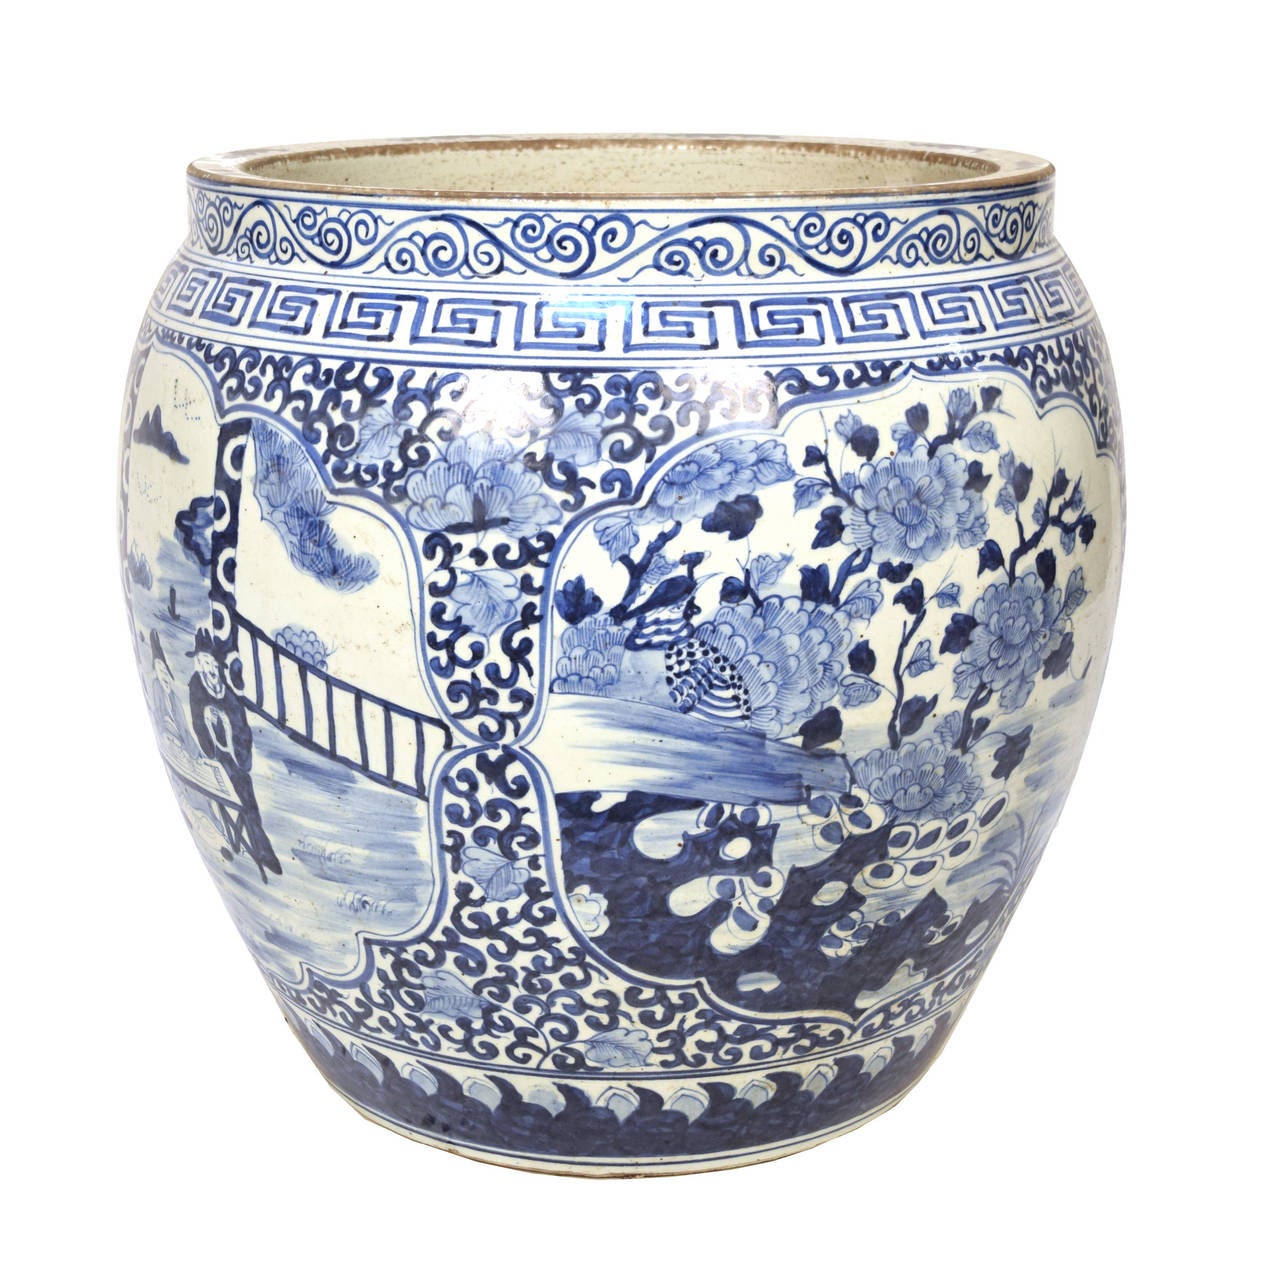 20th century blue and white porcelain fish bowl with cartouche paintings of Chinese scholars.